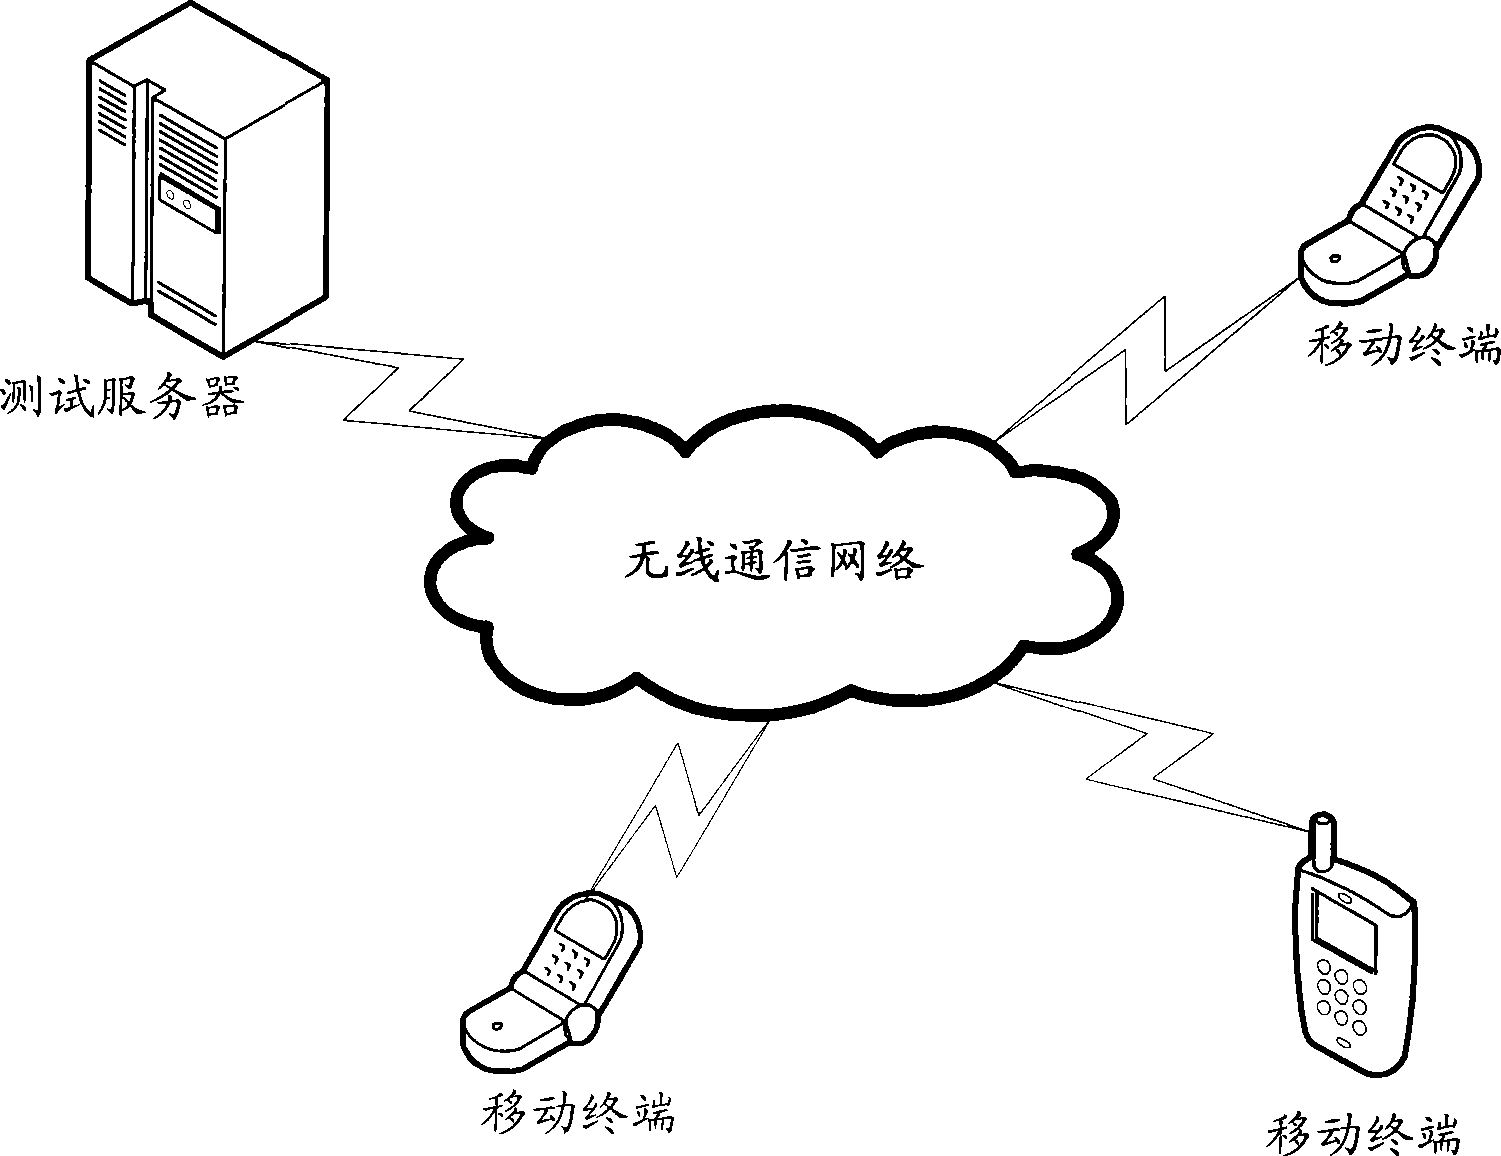 Mobile terminal test method and system